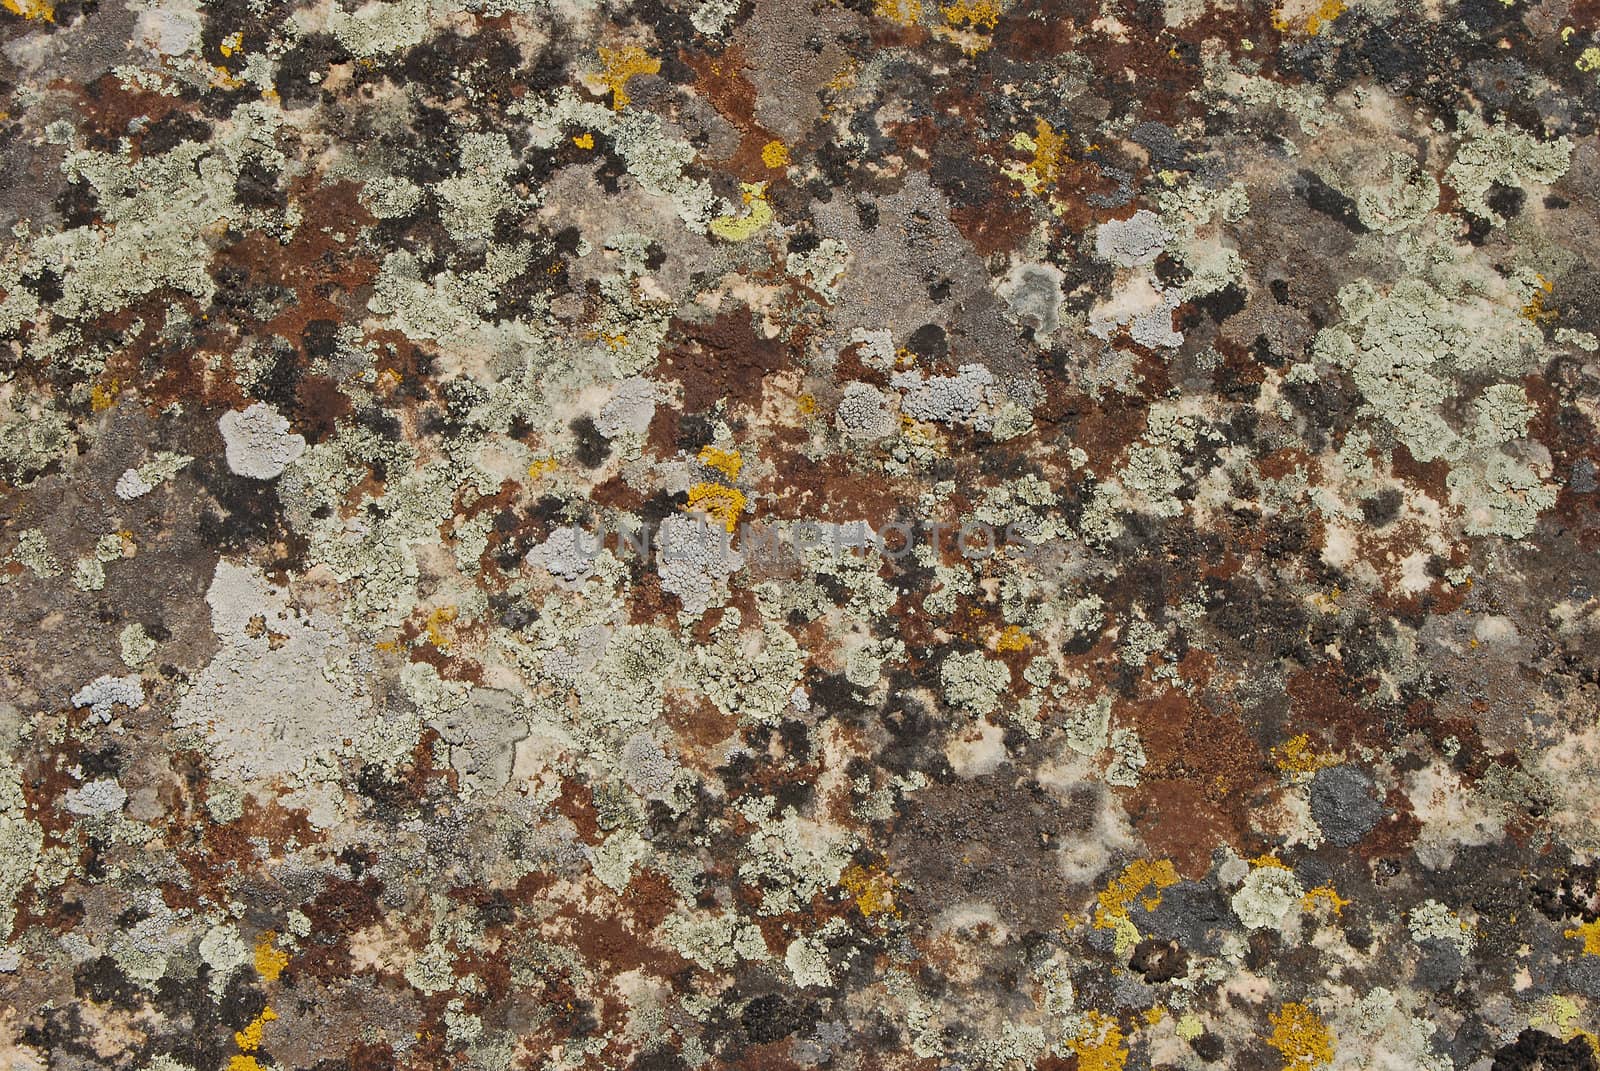 Lichens and moss on rock surface by varbenov